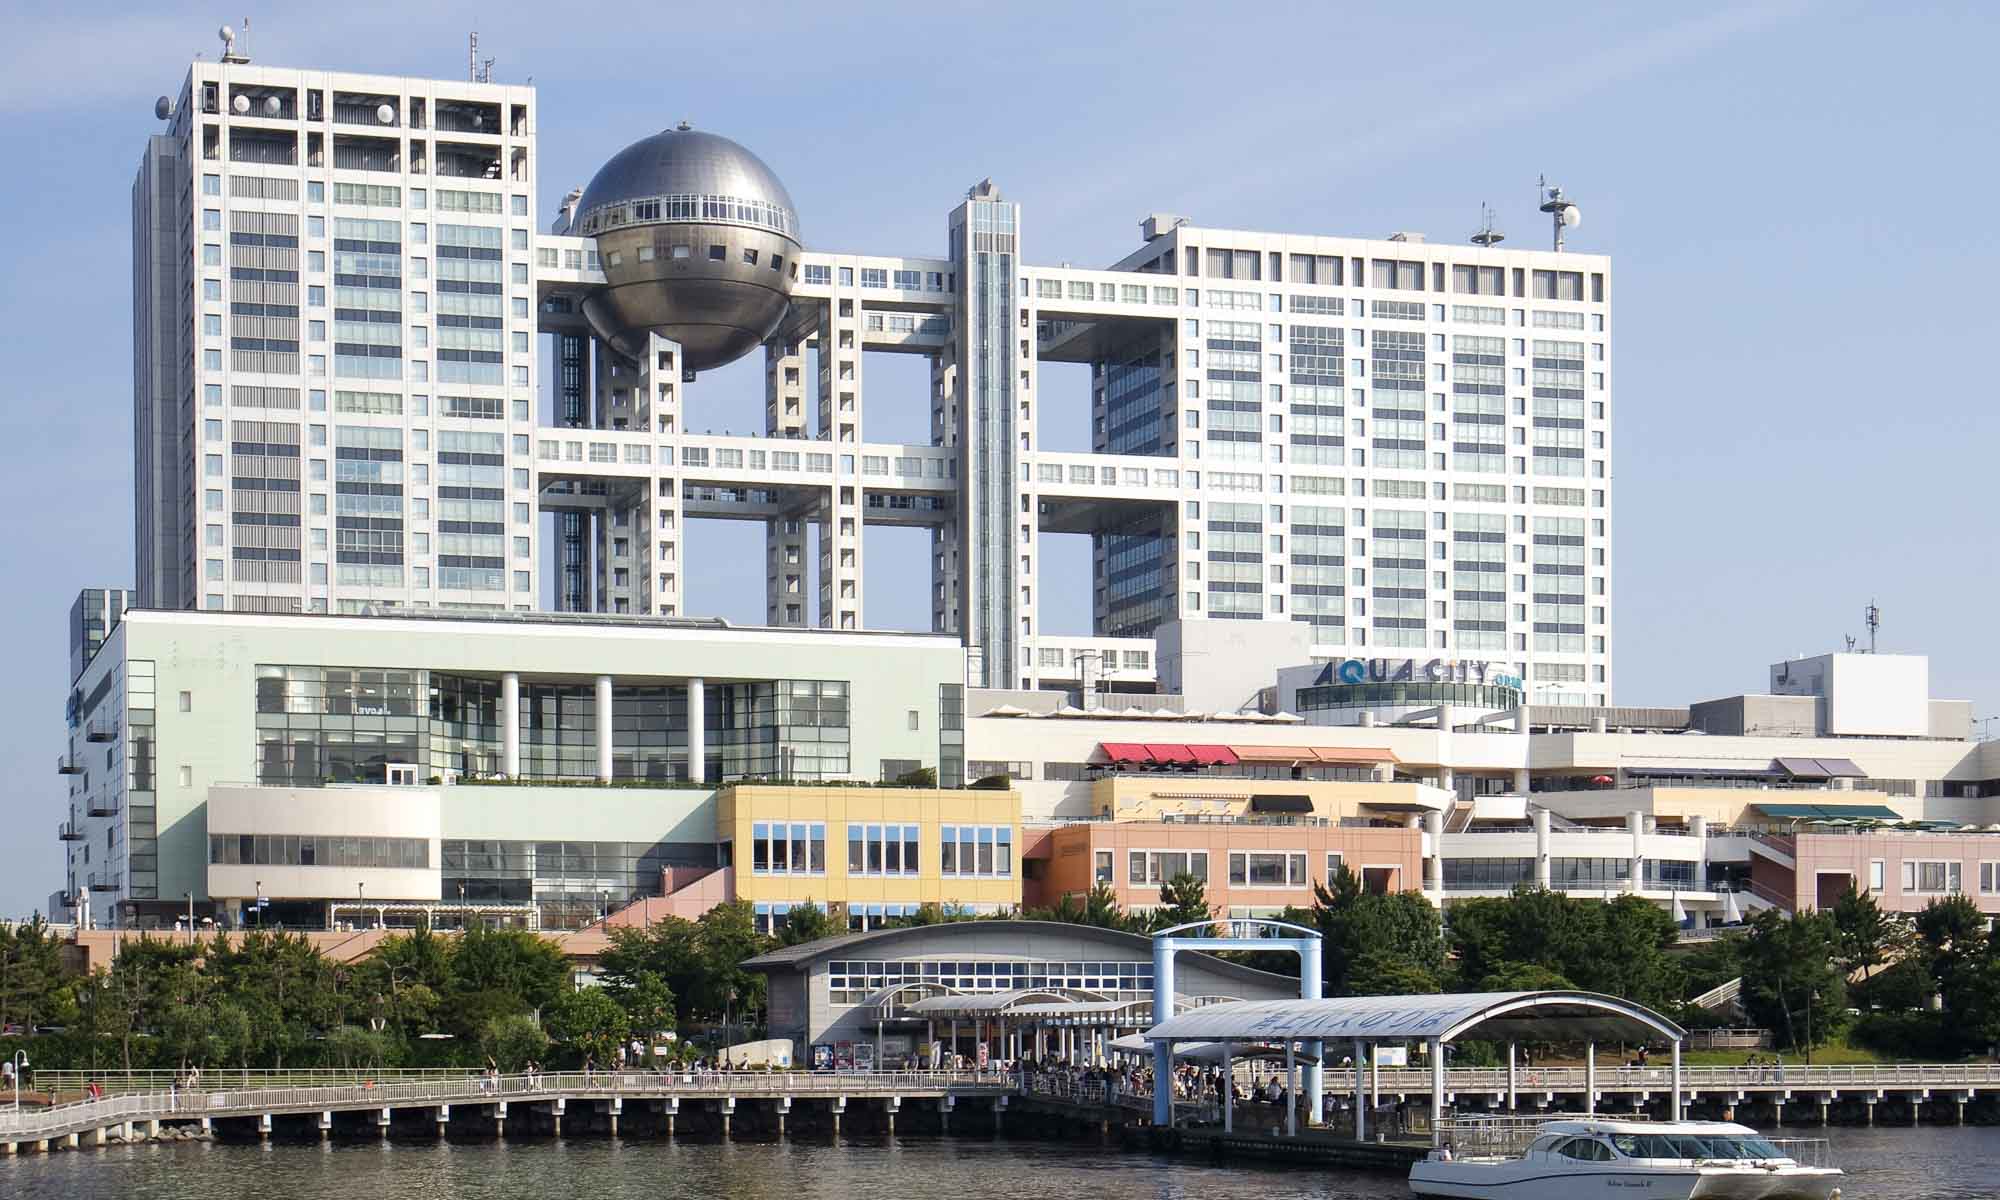 Fuji Television HQ seen from the water